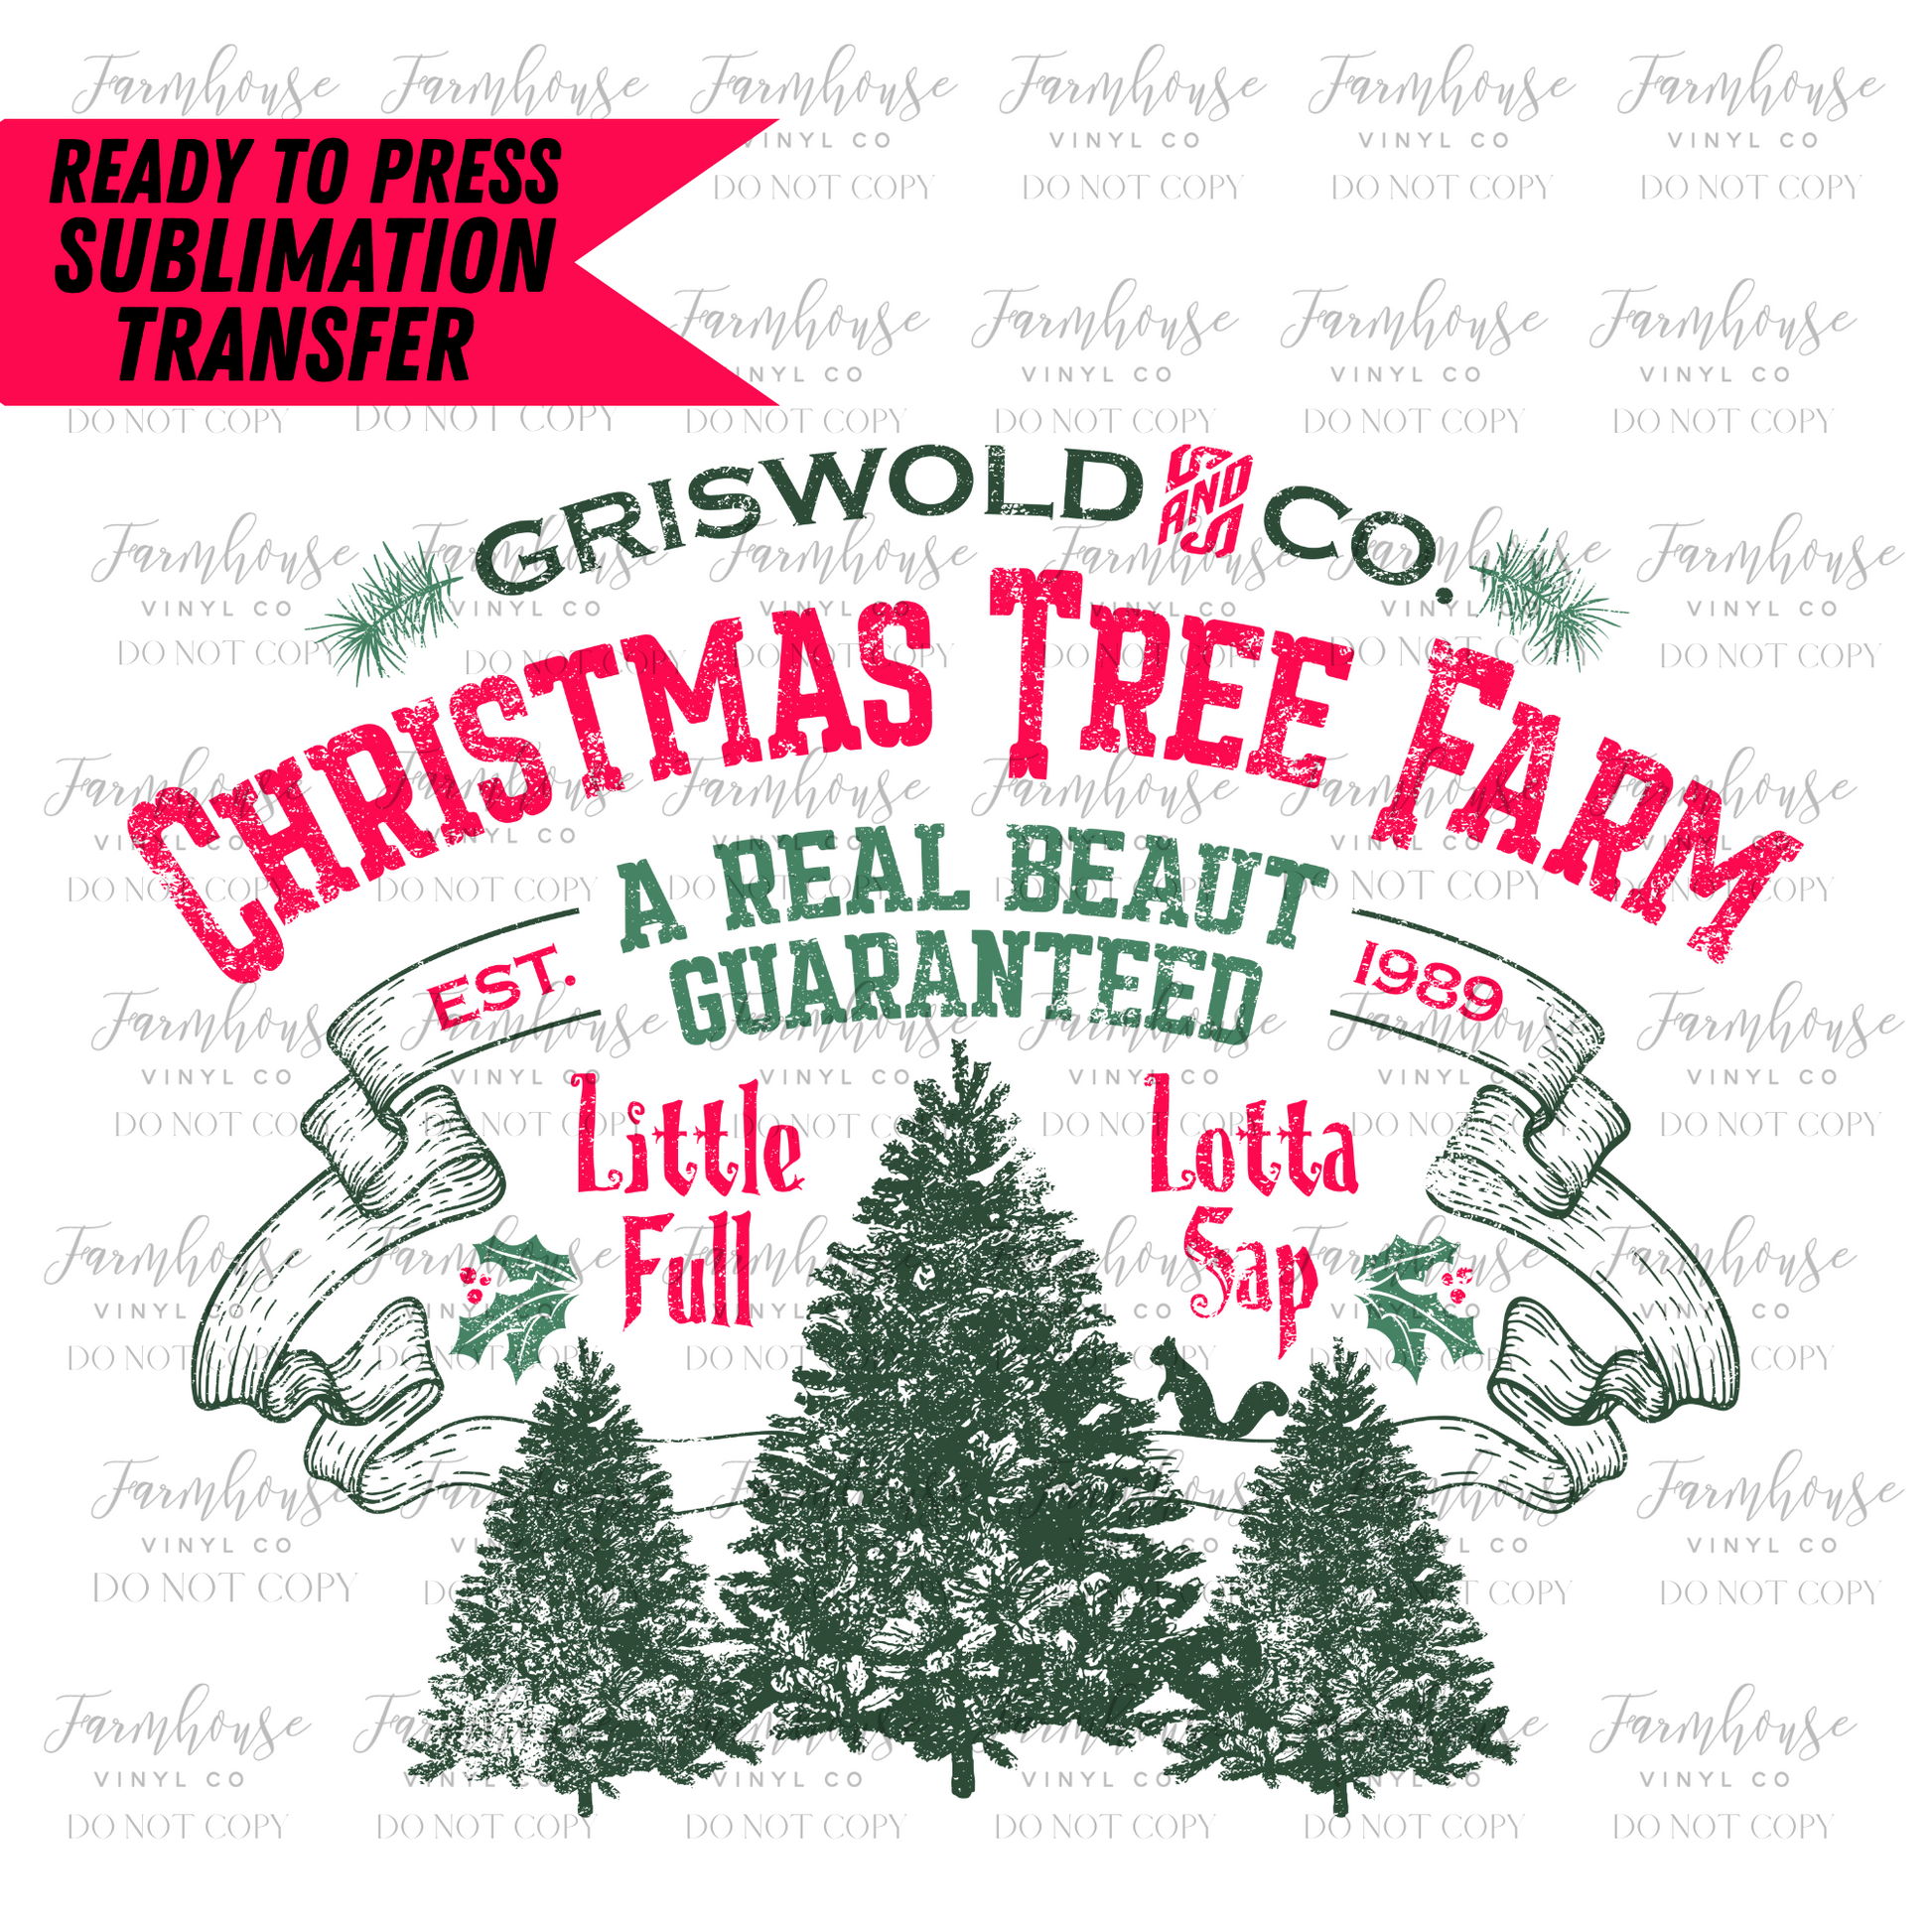 Griswold And Co Christmas Tree Farm Ready To Press Sublimation Transfer Design - Farmhouse Vinyl Co